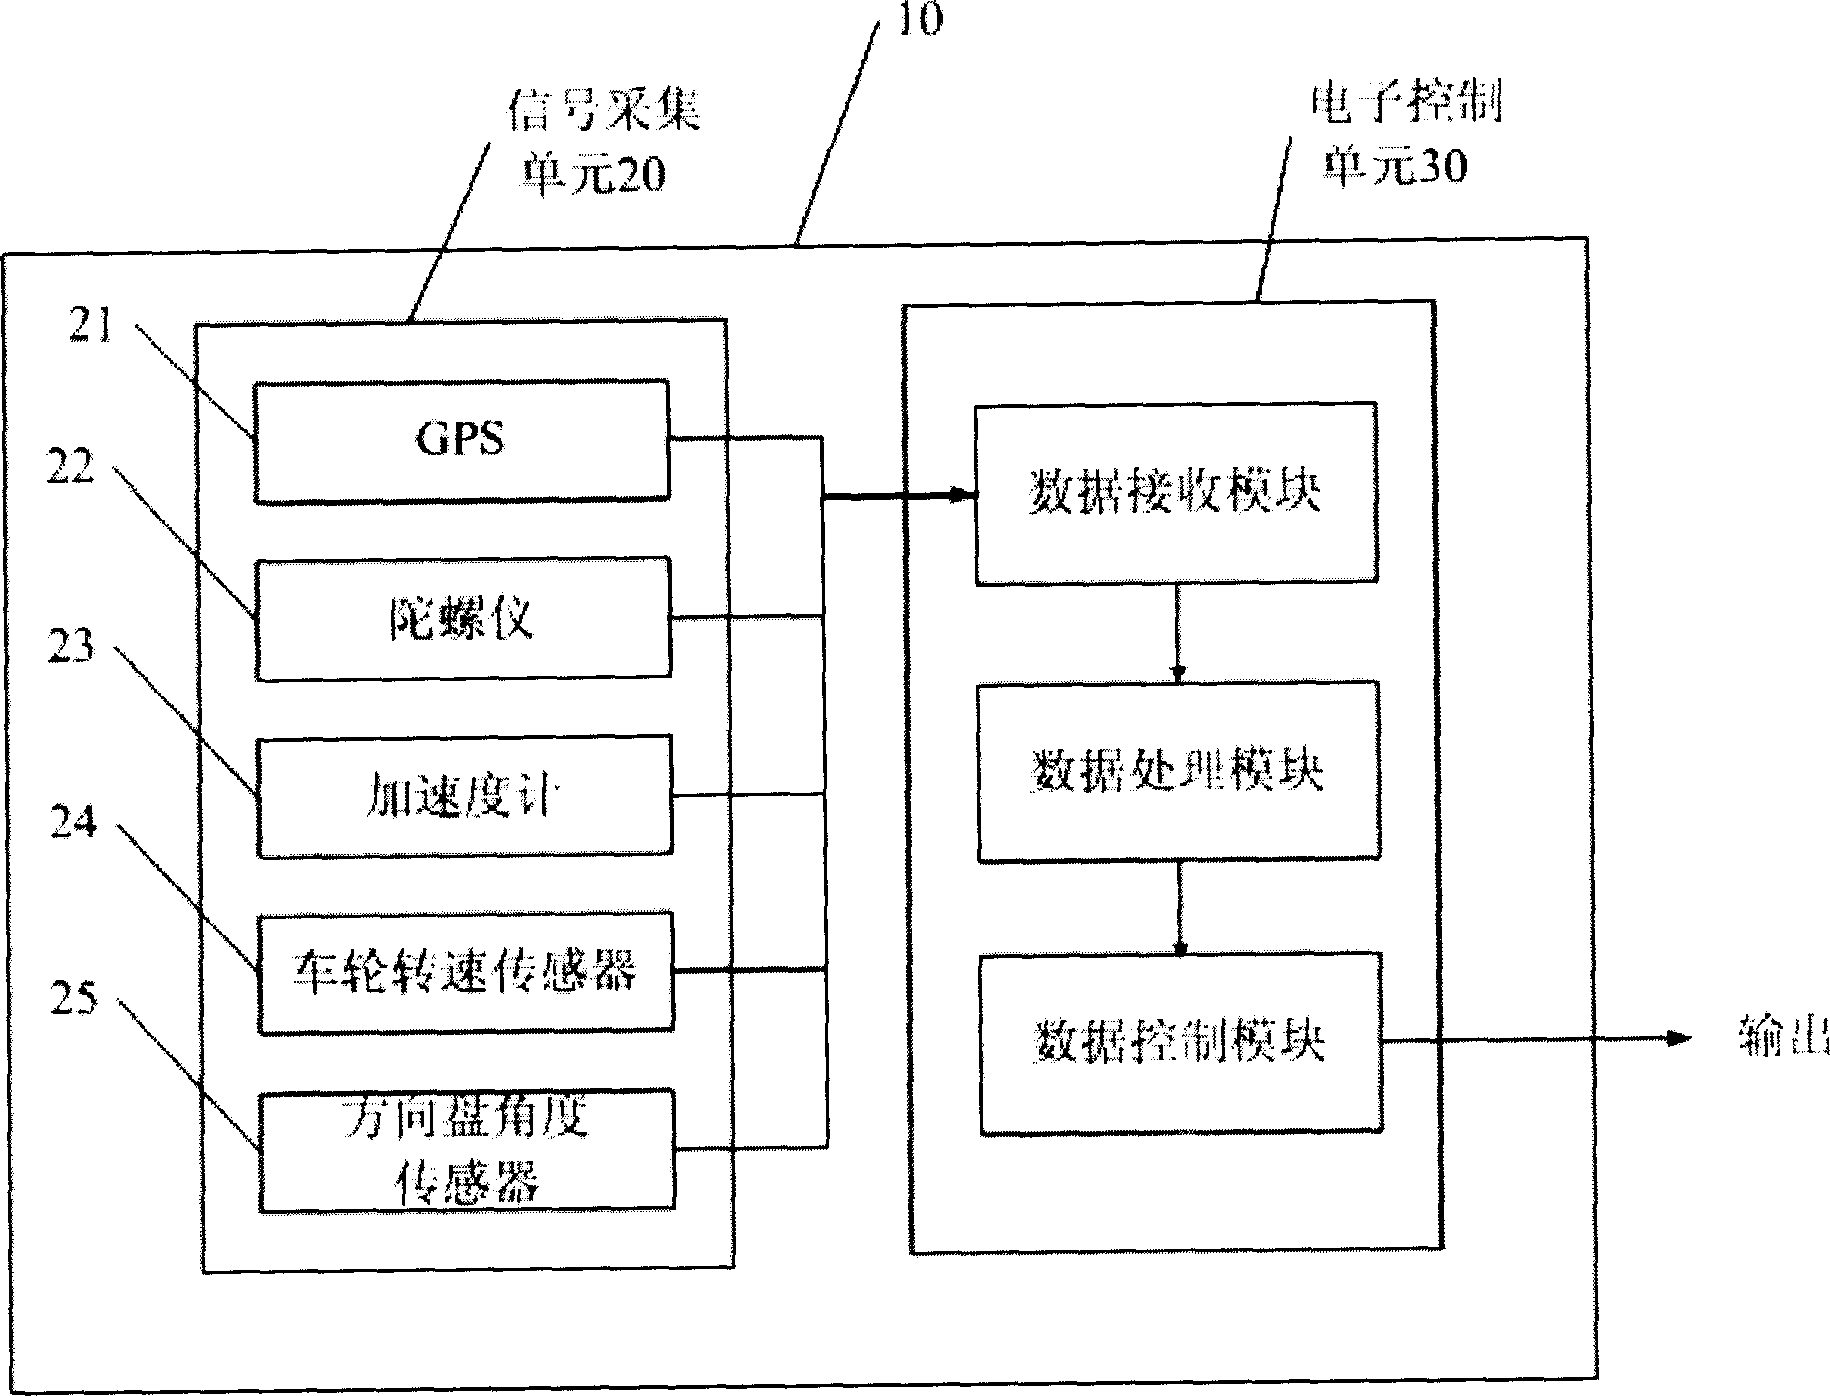 Motor vehicle ABS control system and method